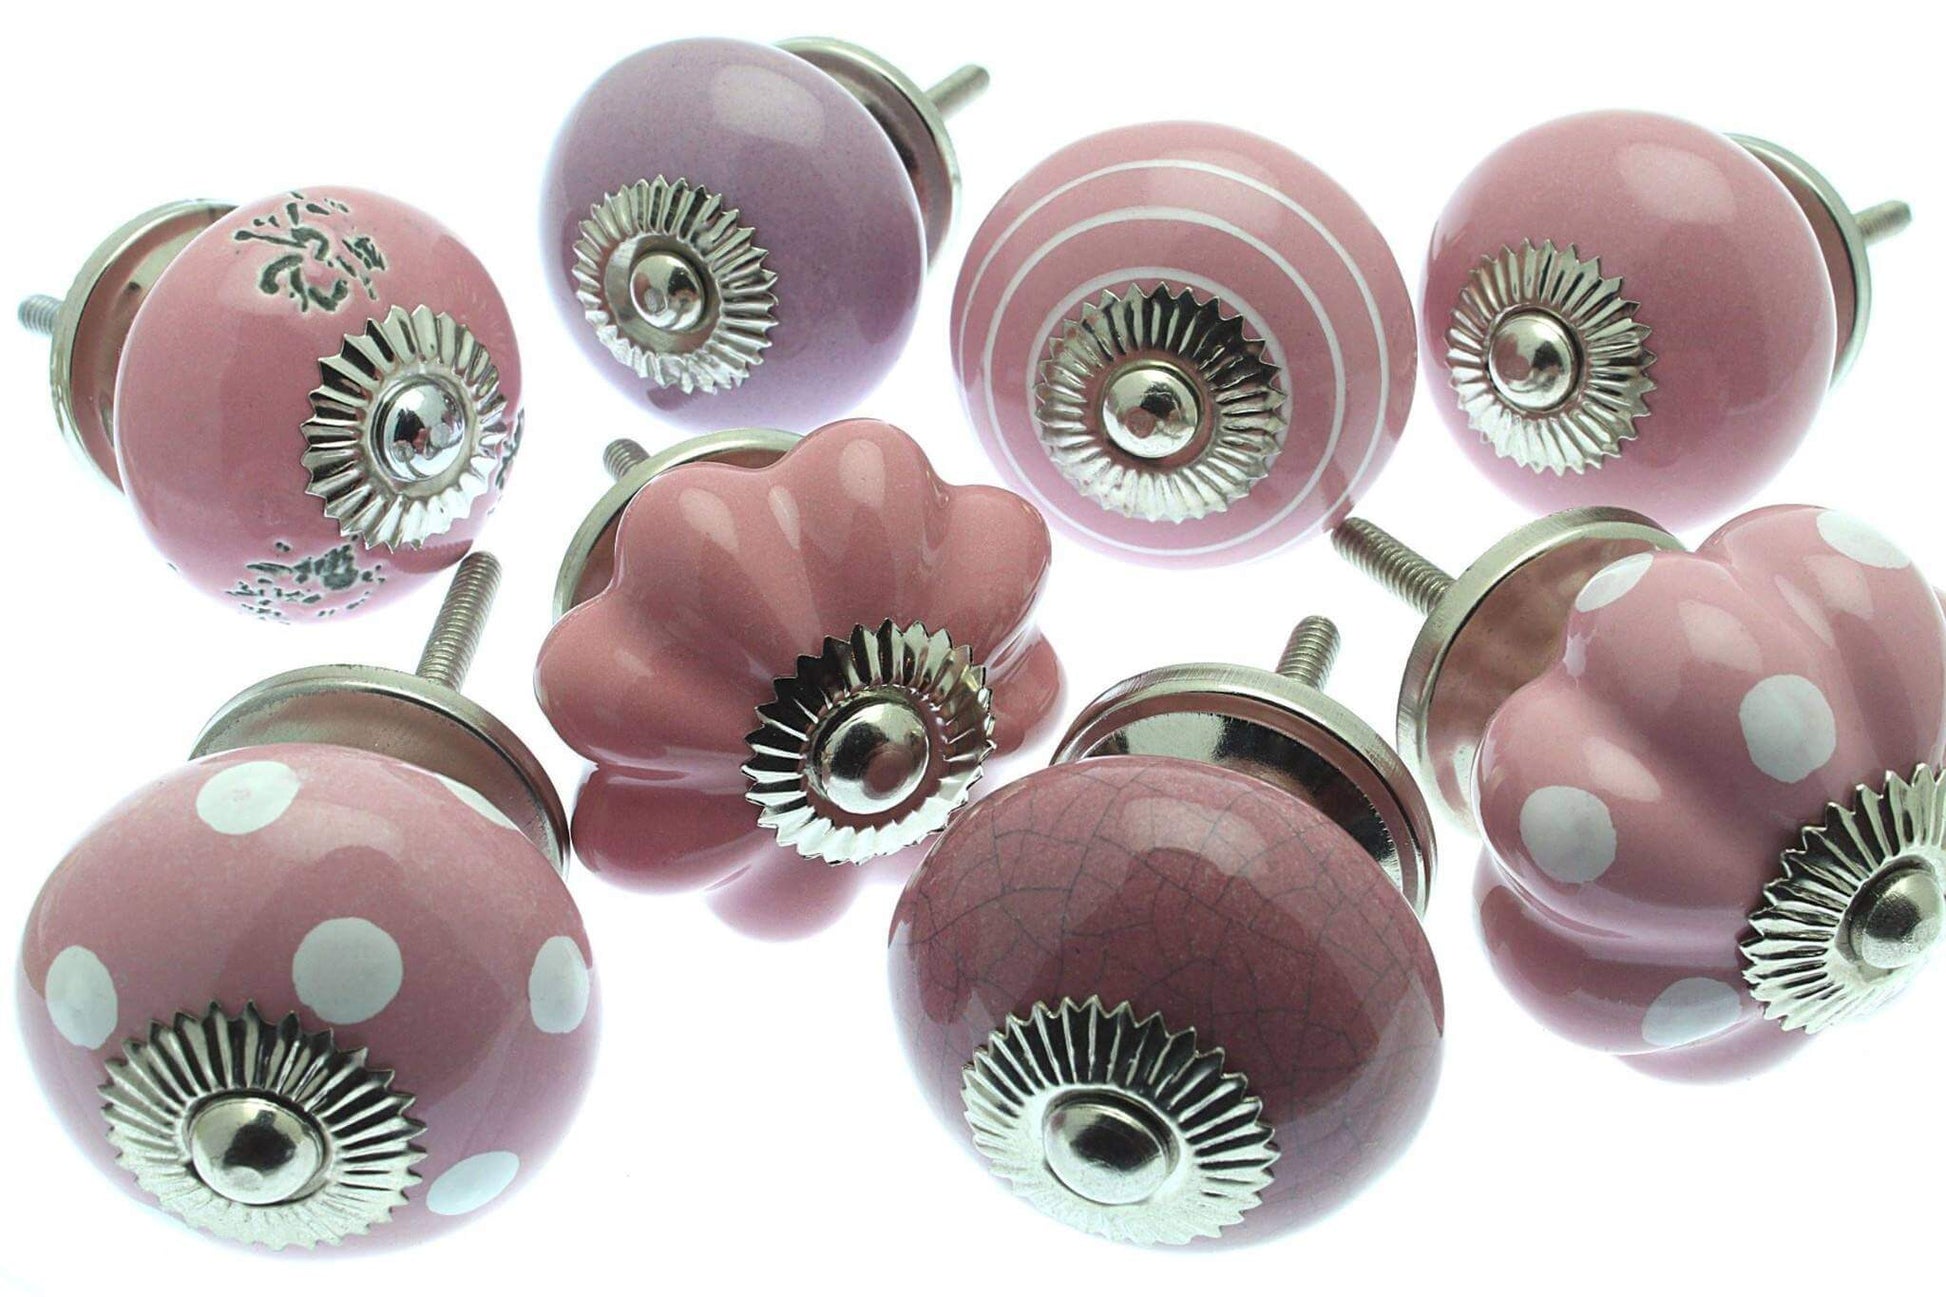 Ceramic Cupboard Knobs - Set Of 8 Perfect Pinks, Mixed With Gentle Lilac And White (MG-216)